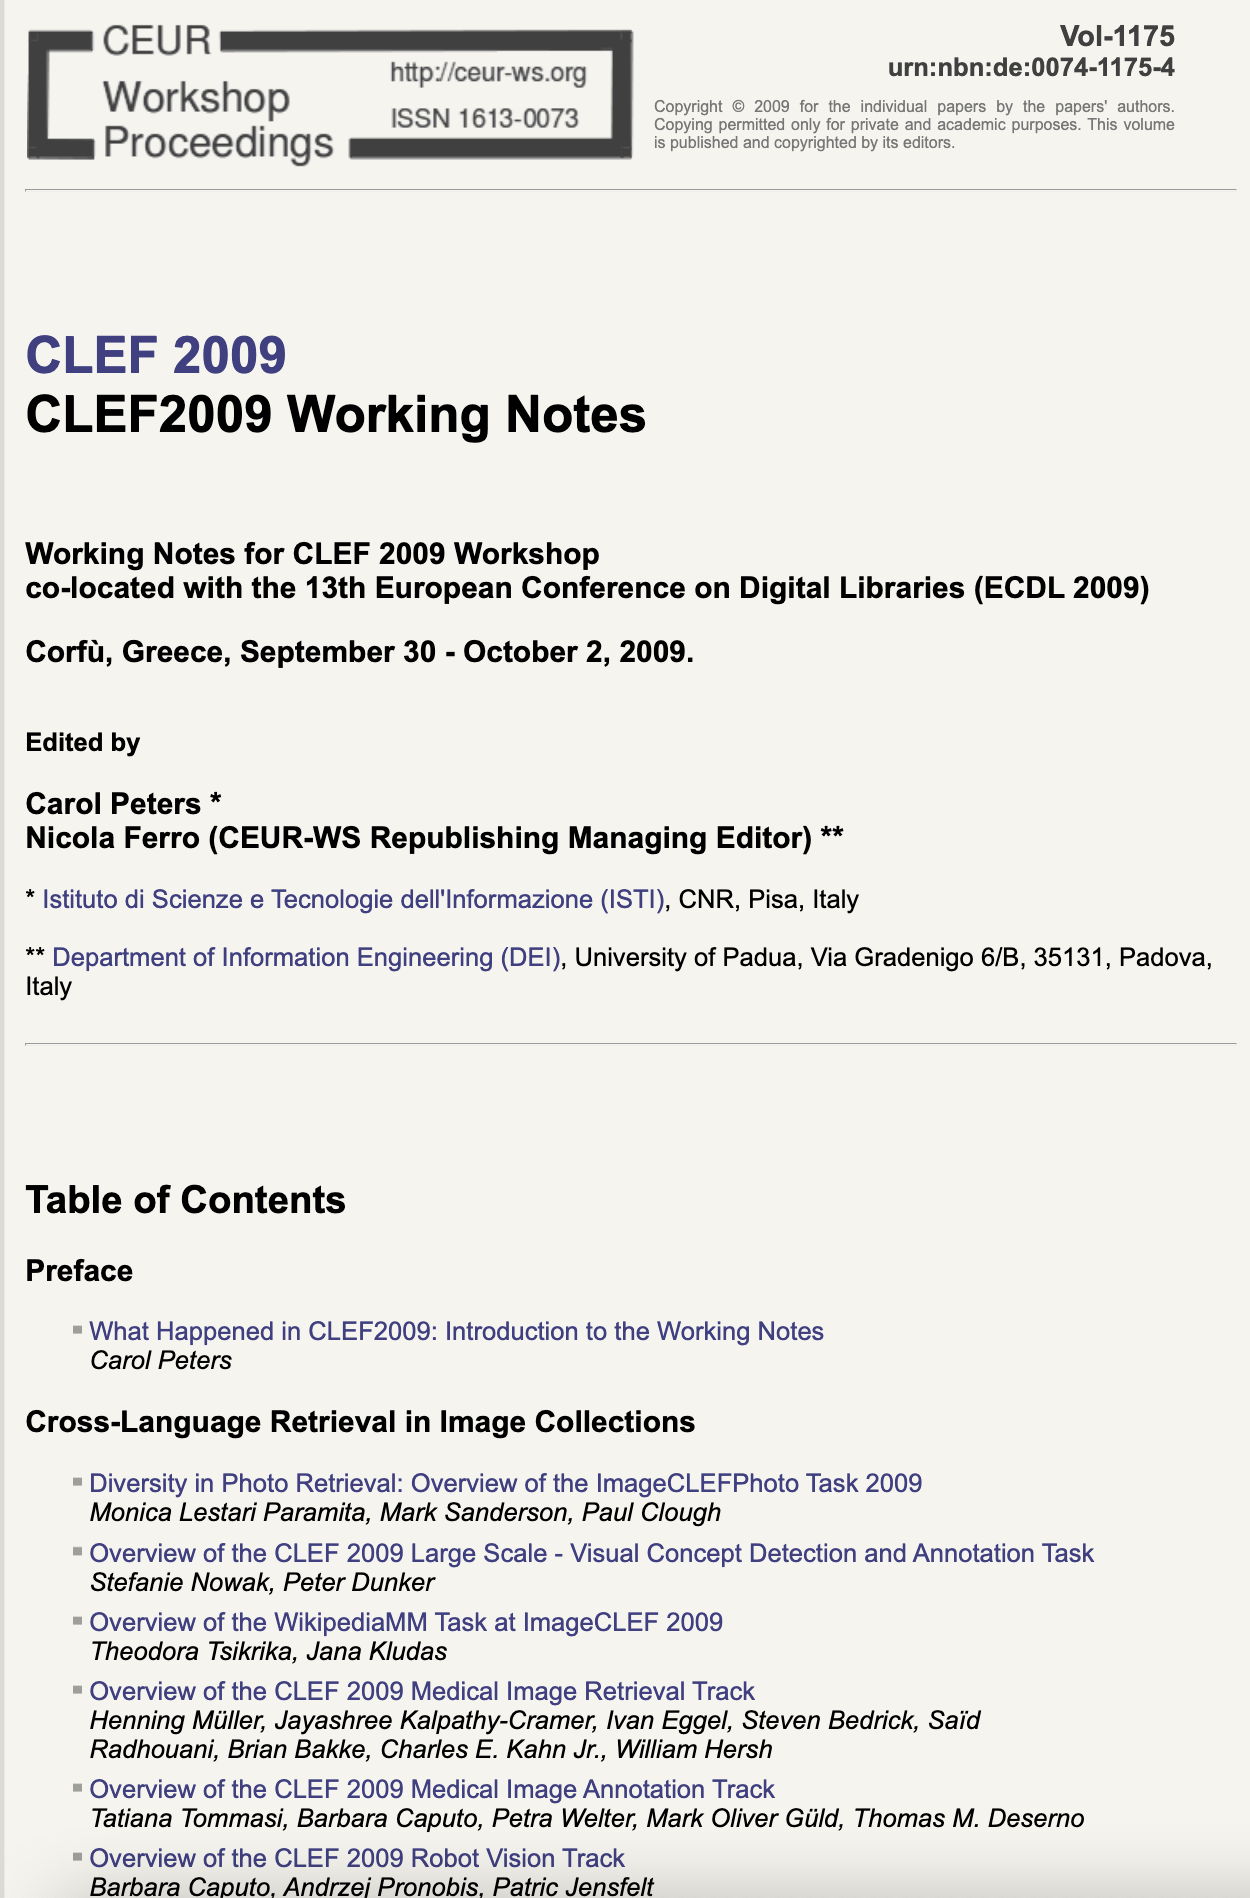 CLEF 2009 CEUR-WS Working Notes page